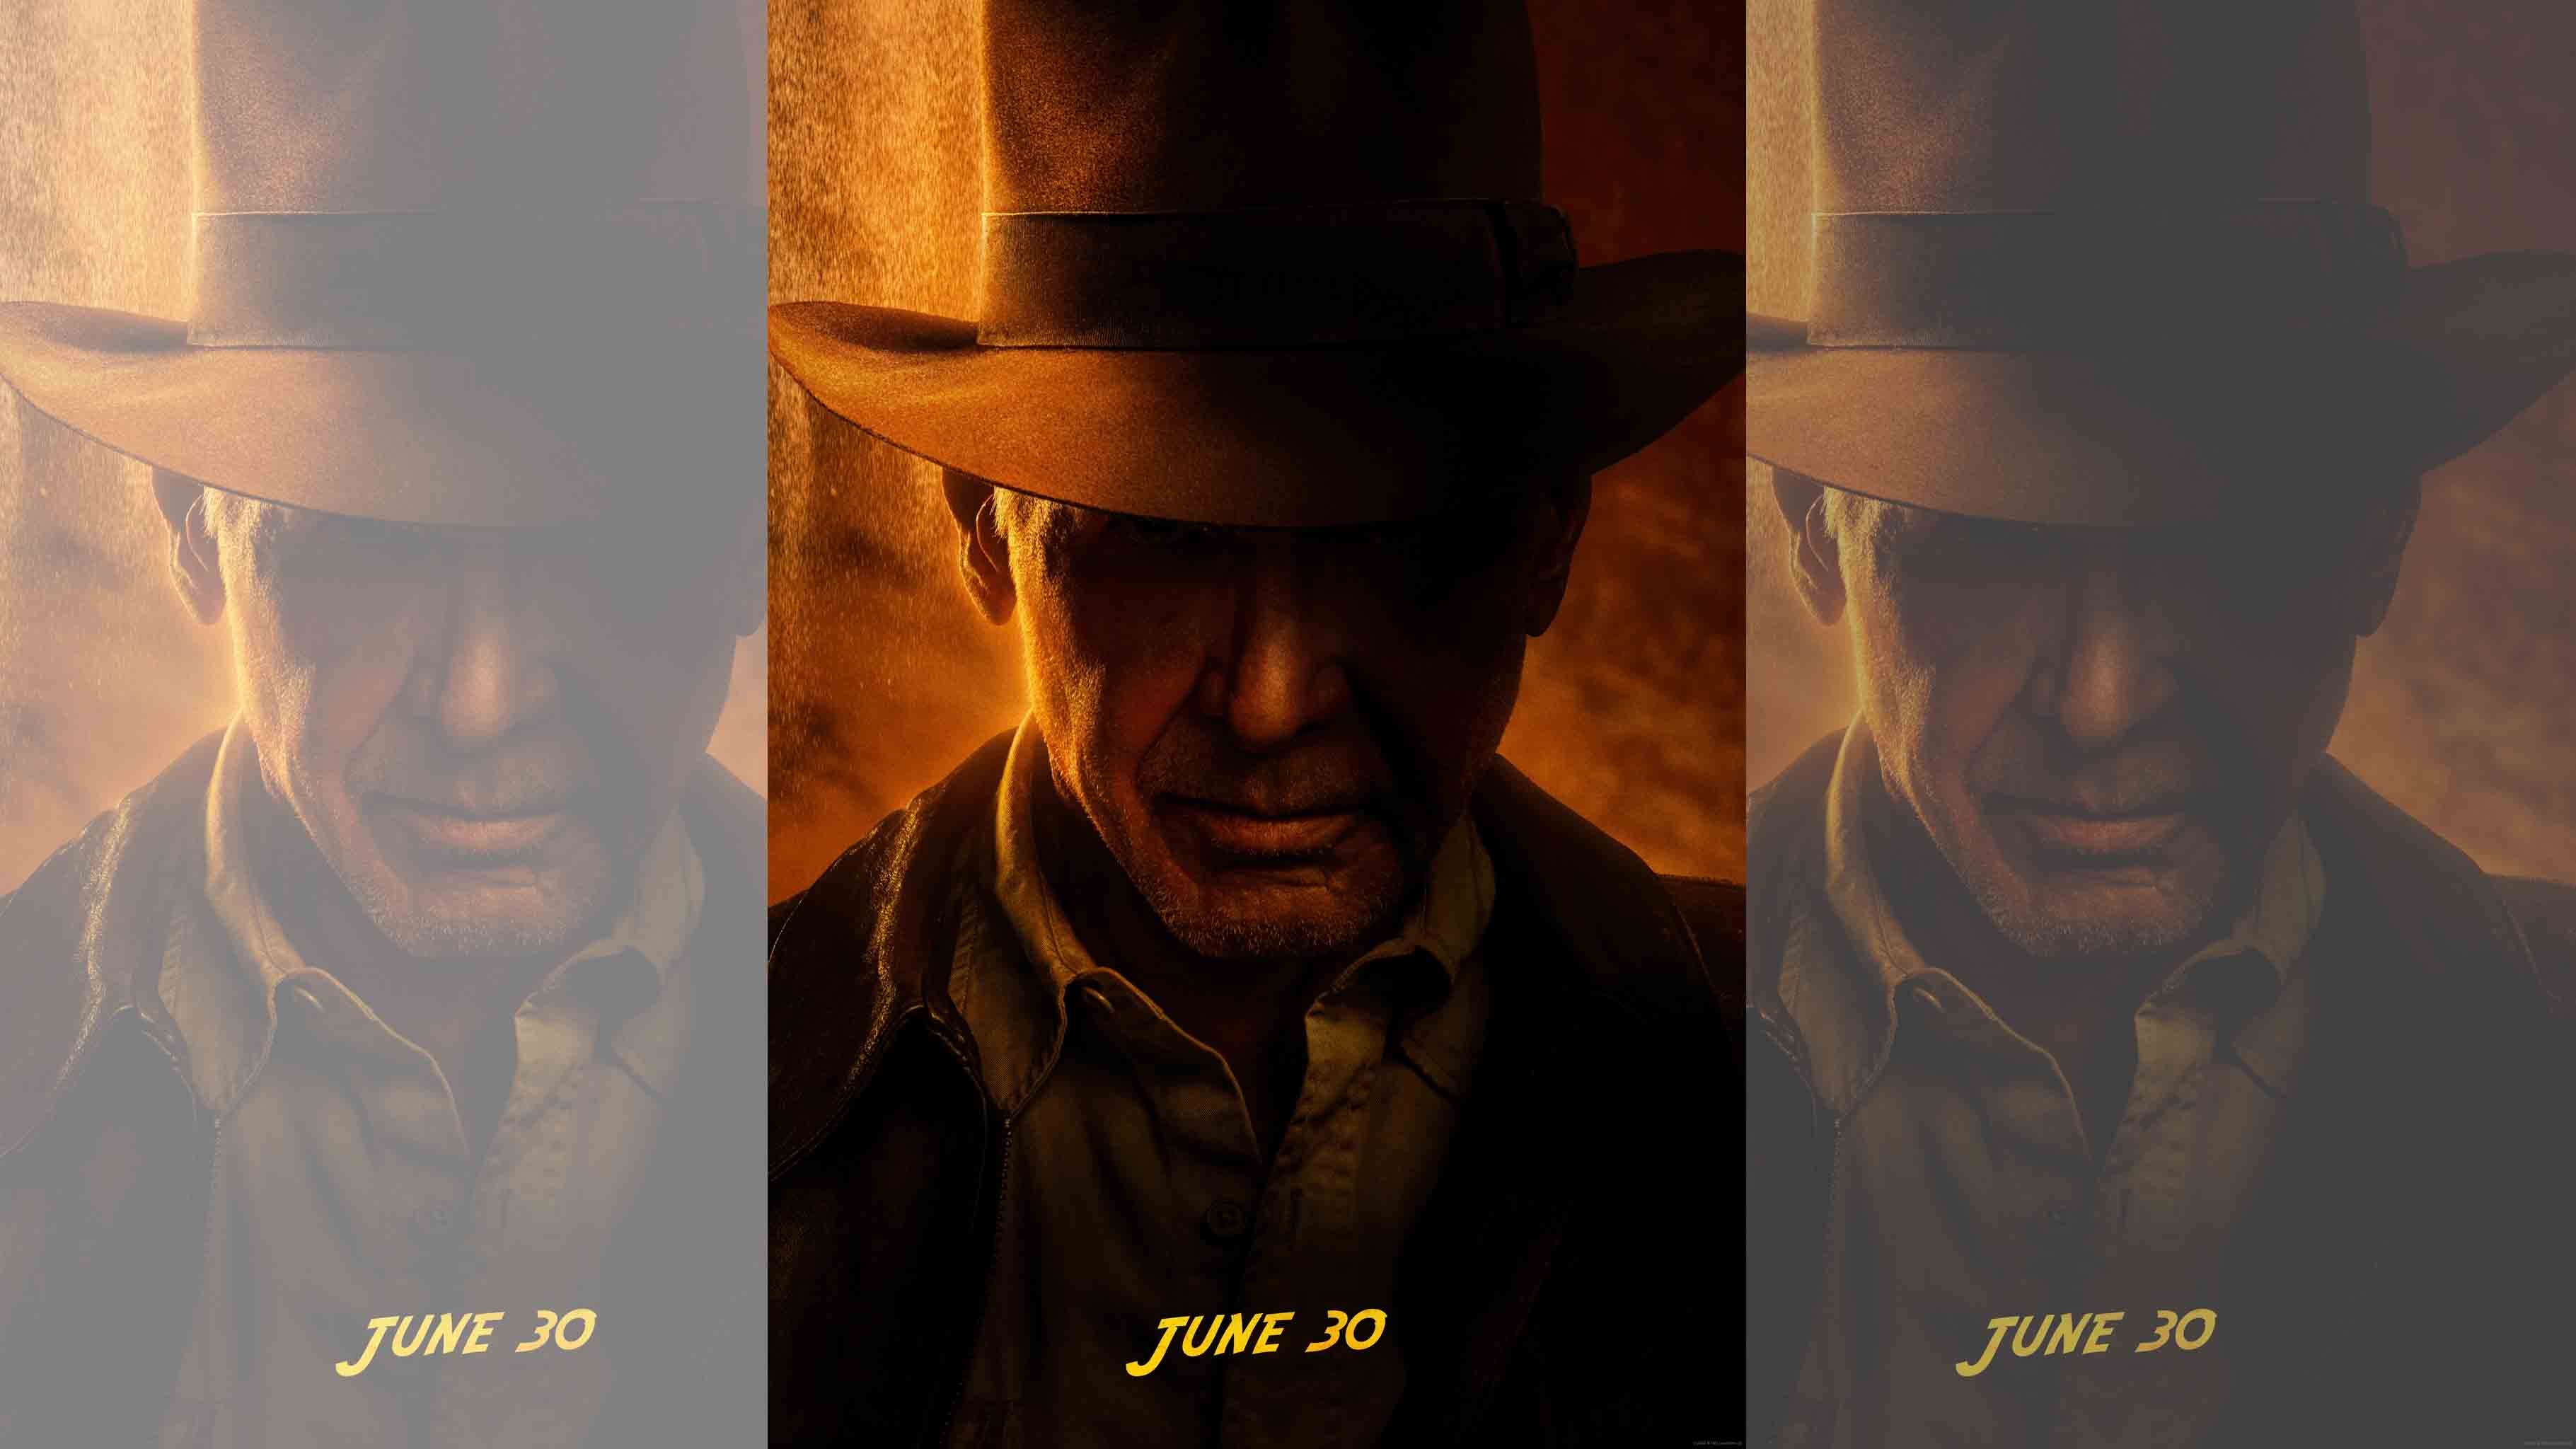 Indiana Jones and the Dial of Destiny Trailer Revealed